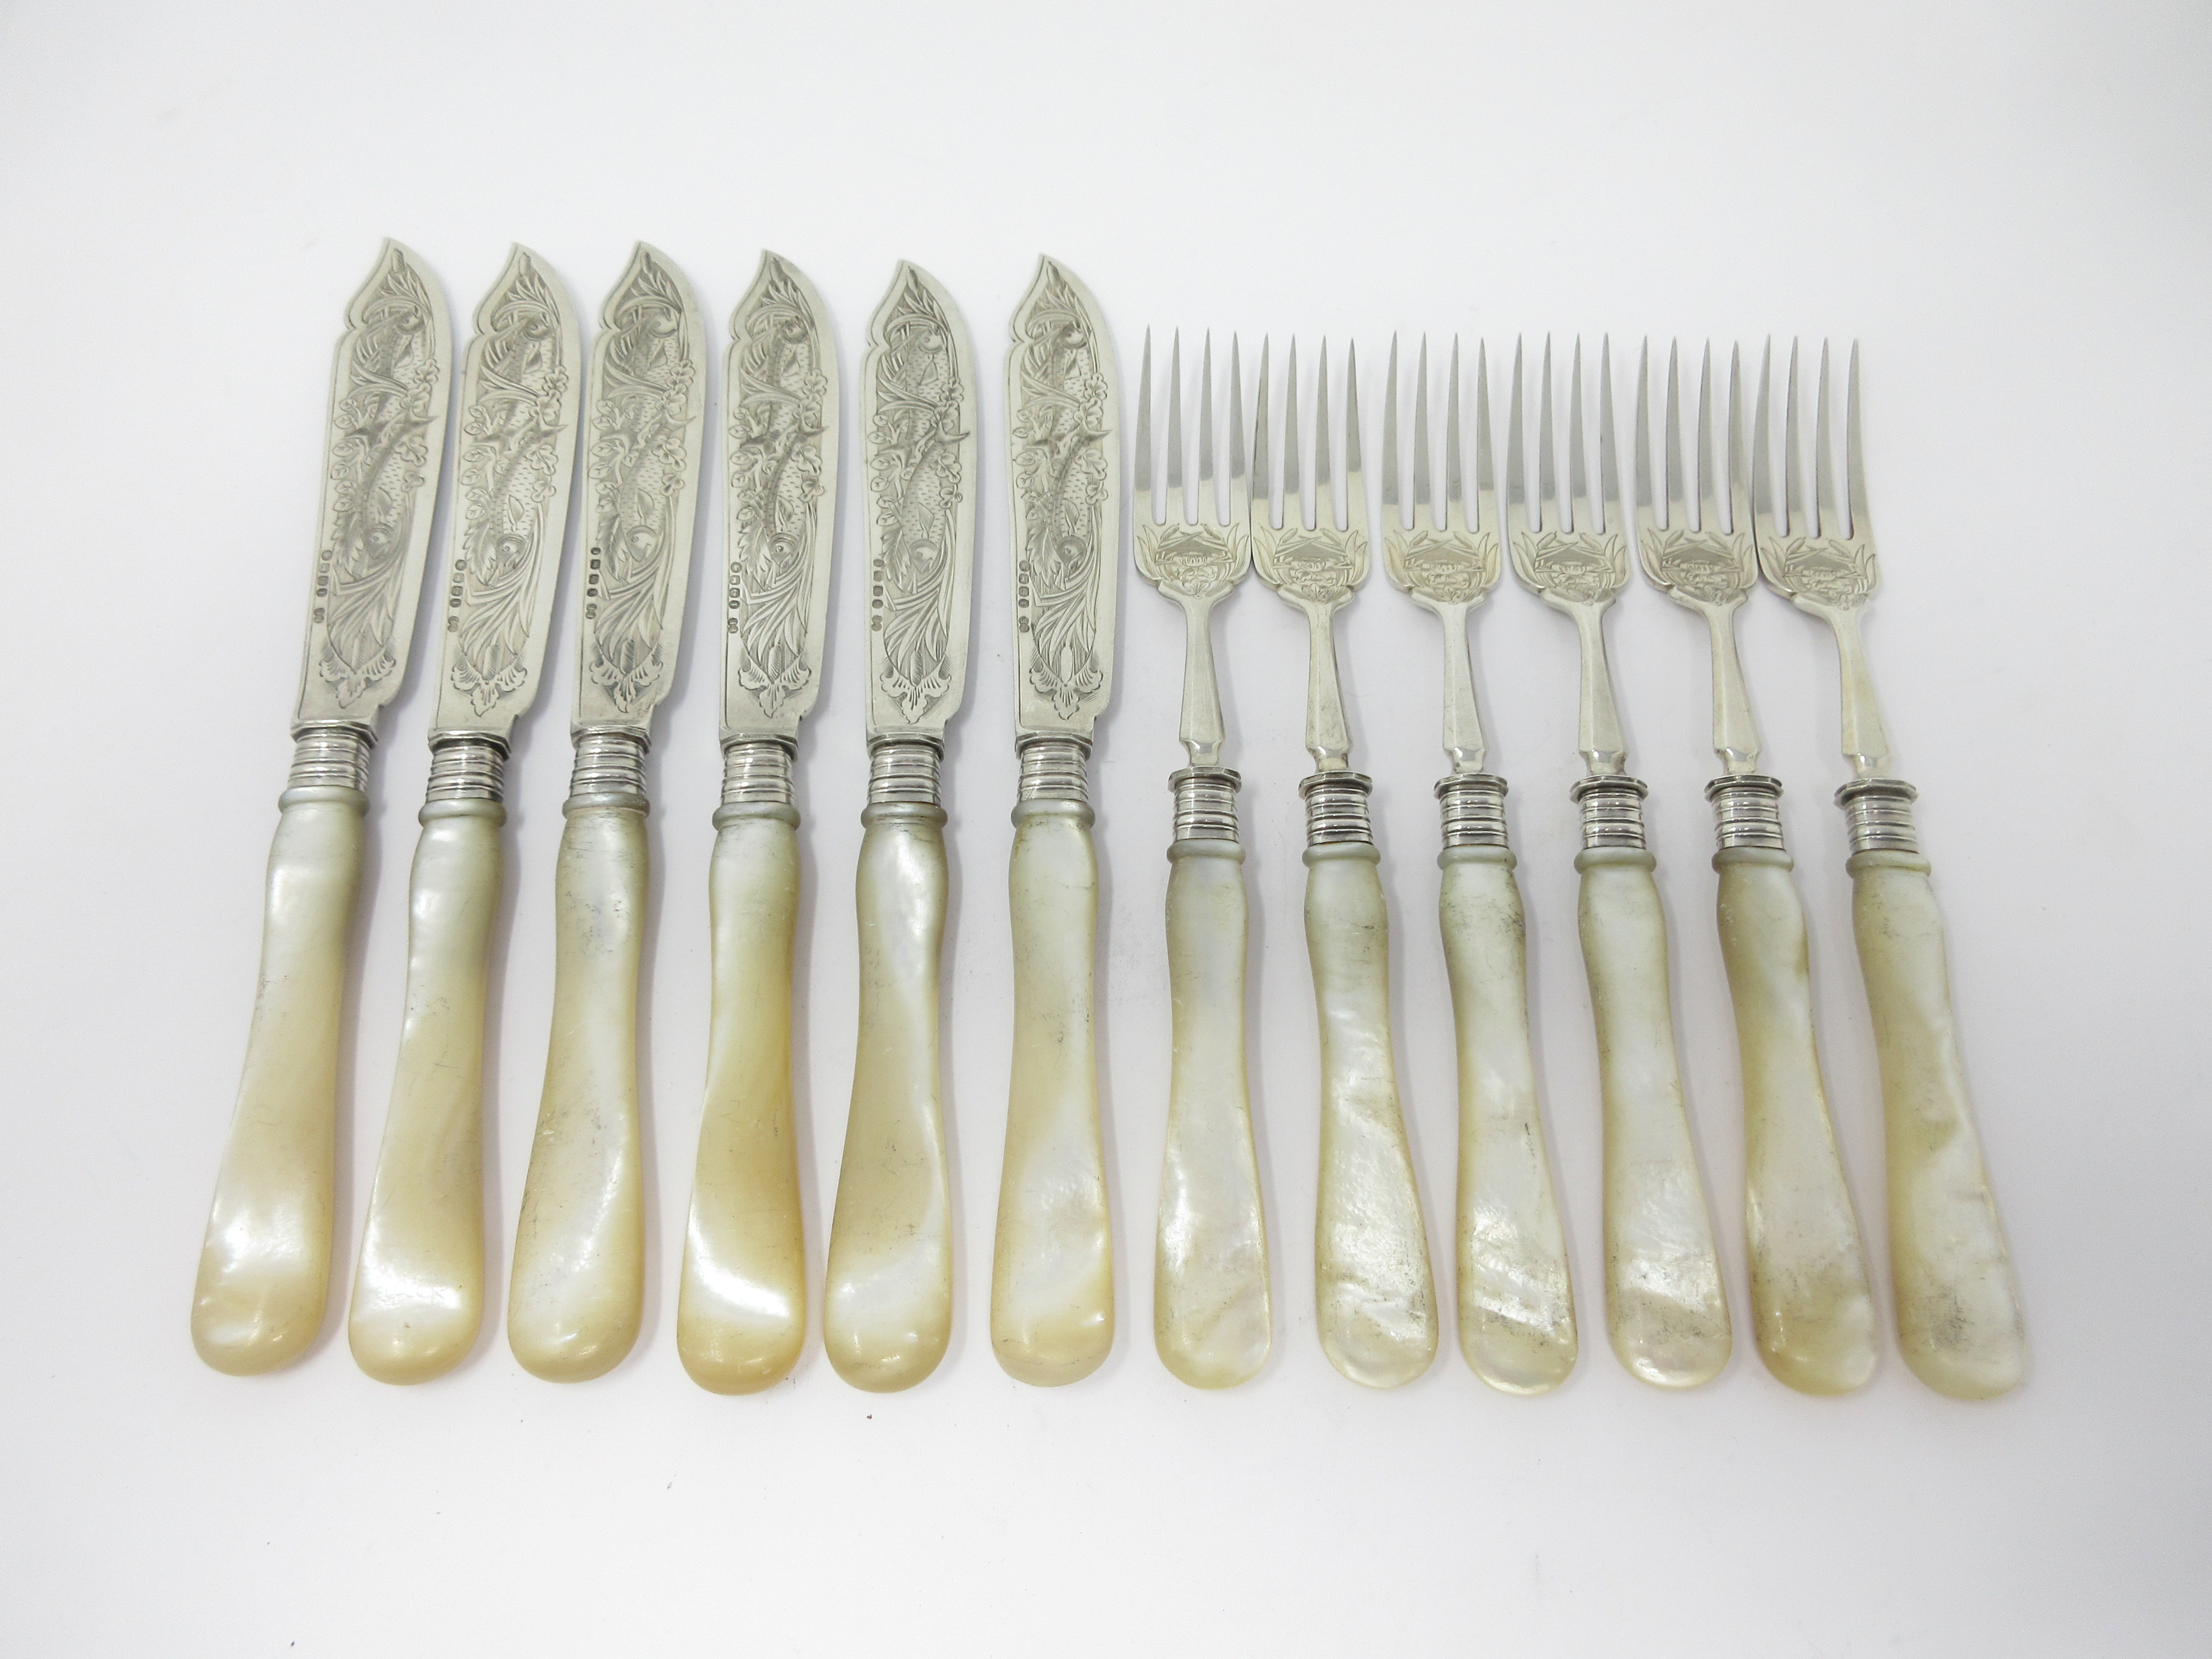 Six Victorian Fish Knives and Forks with finely engraved silver blades and mother-of-pearl hafts,